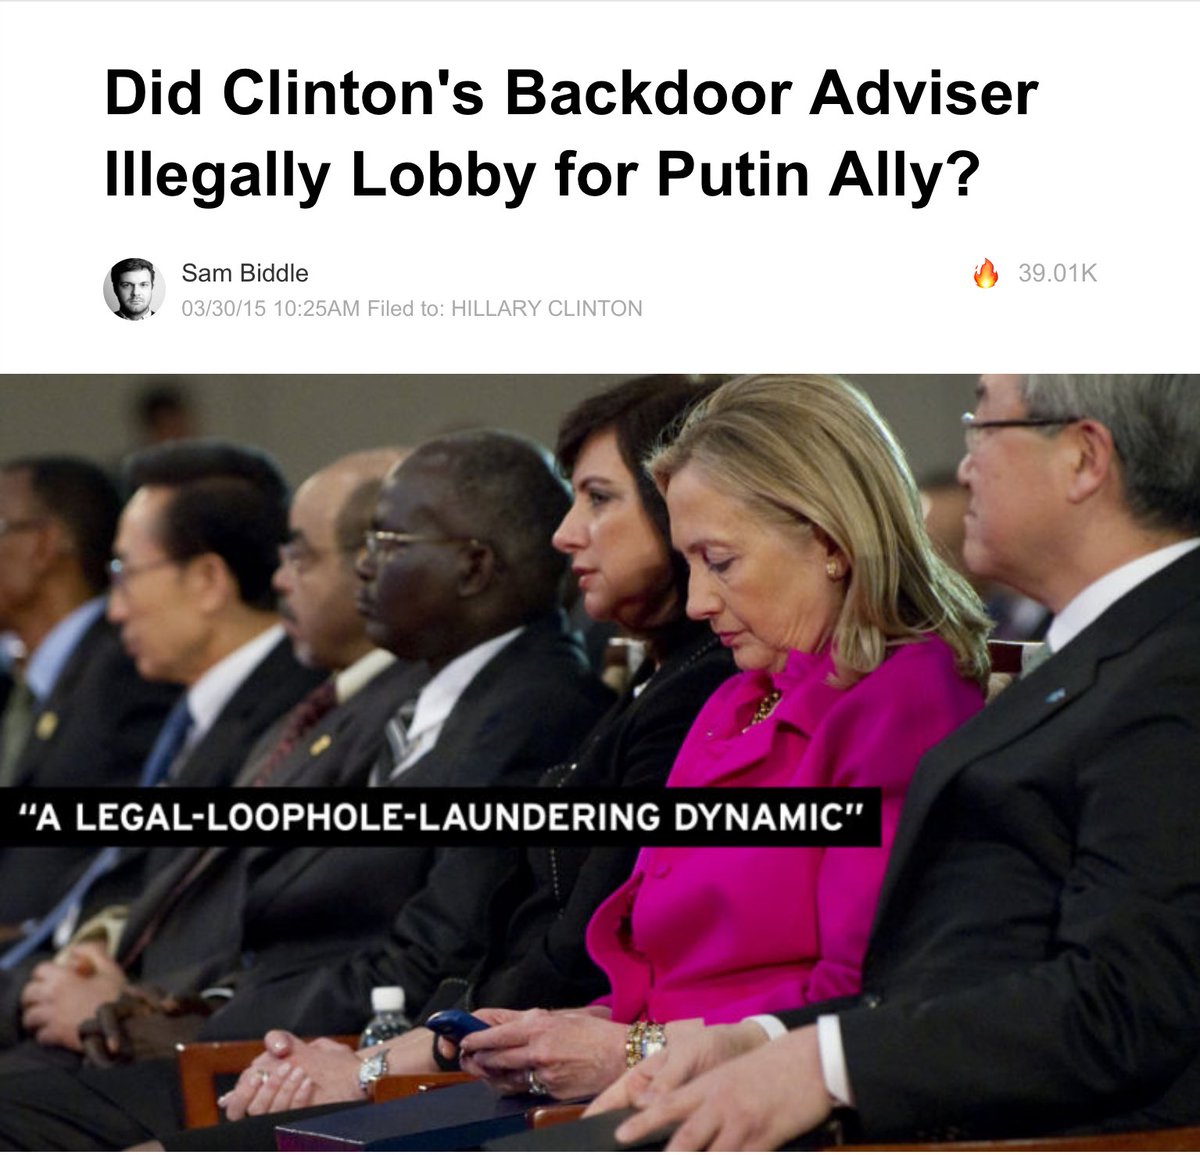 Ivanishvili was also at the center of a lobbying effort aimed at Clinton.On Sept. 3, 2012, Blumenthal emailed his friend Hillary Clinton memos written by Ivanishvili and John Kornblum, an attorney who served as Bill Clinton’s ambassador to Germany.  http://gawker.com/did-clintons-backdoor-adviser-illegally-lobby-for-putin-1693111549